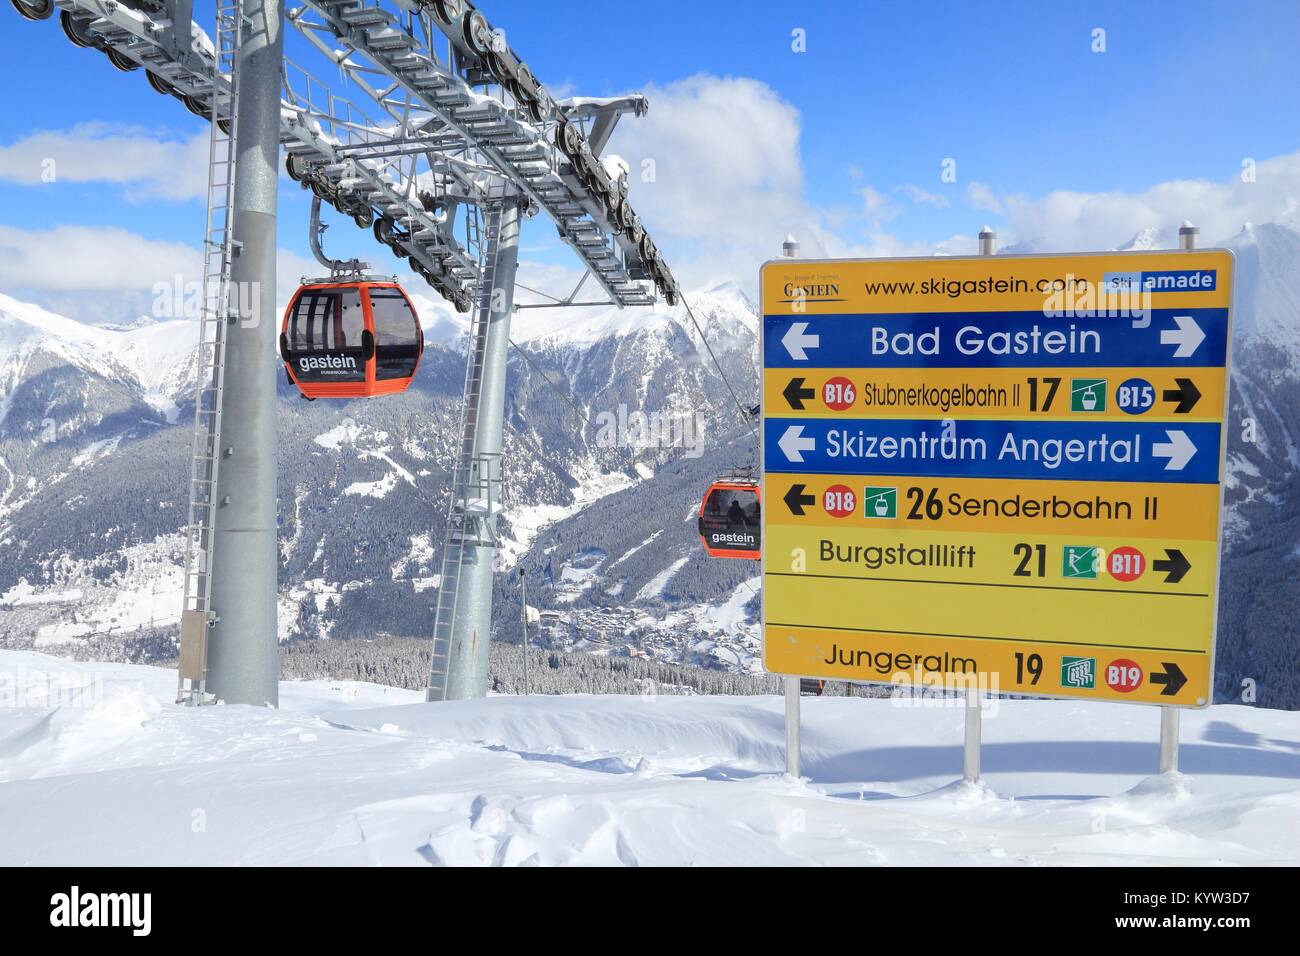 BAD GASTEIN, AUSTRIA - MARCH 10, 2016: People ride gondolas of cable car in Bad Gastein. It is part of Ski Amade, one of largest ski regions in Europe Stock Photo